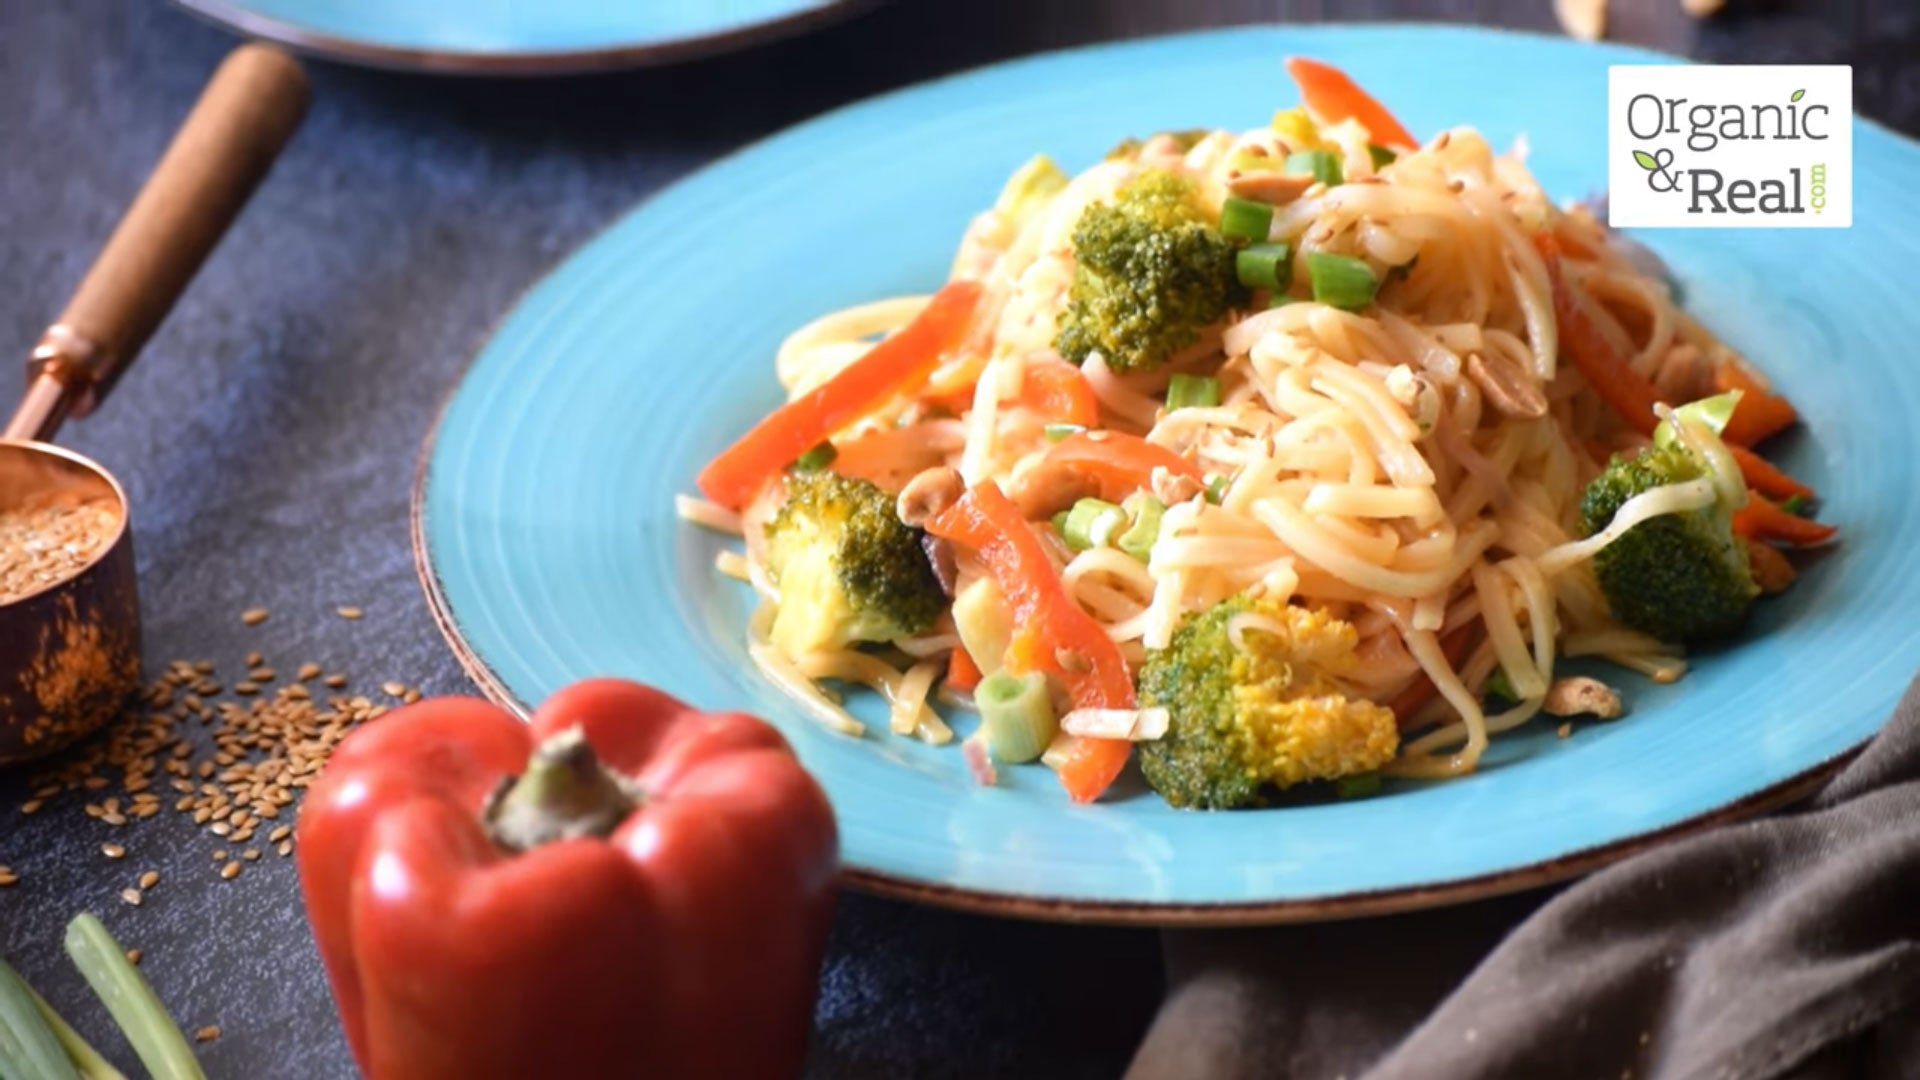 An easy-to-make Vegan Rice Noodle Bowl recipe